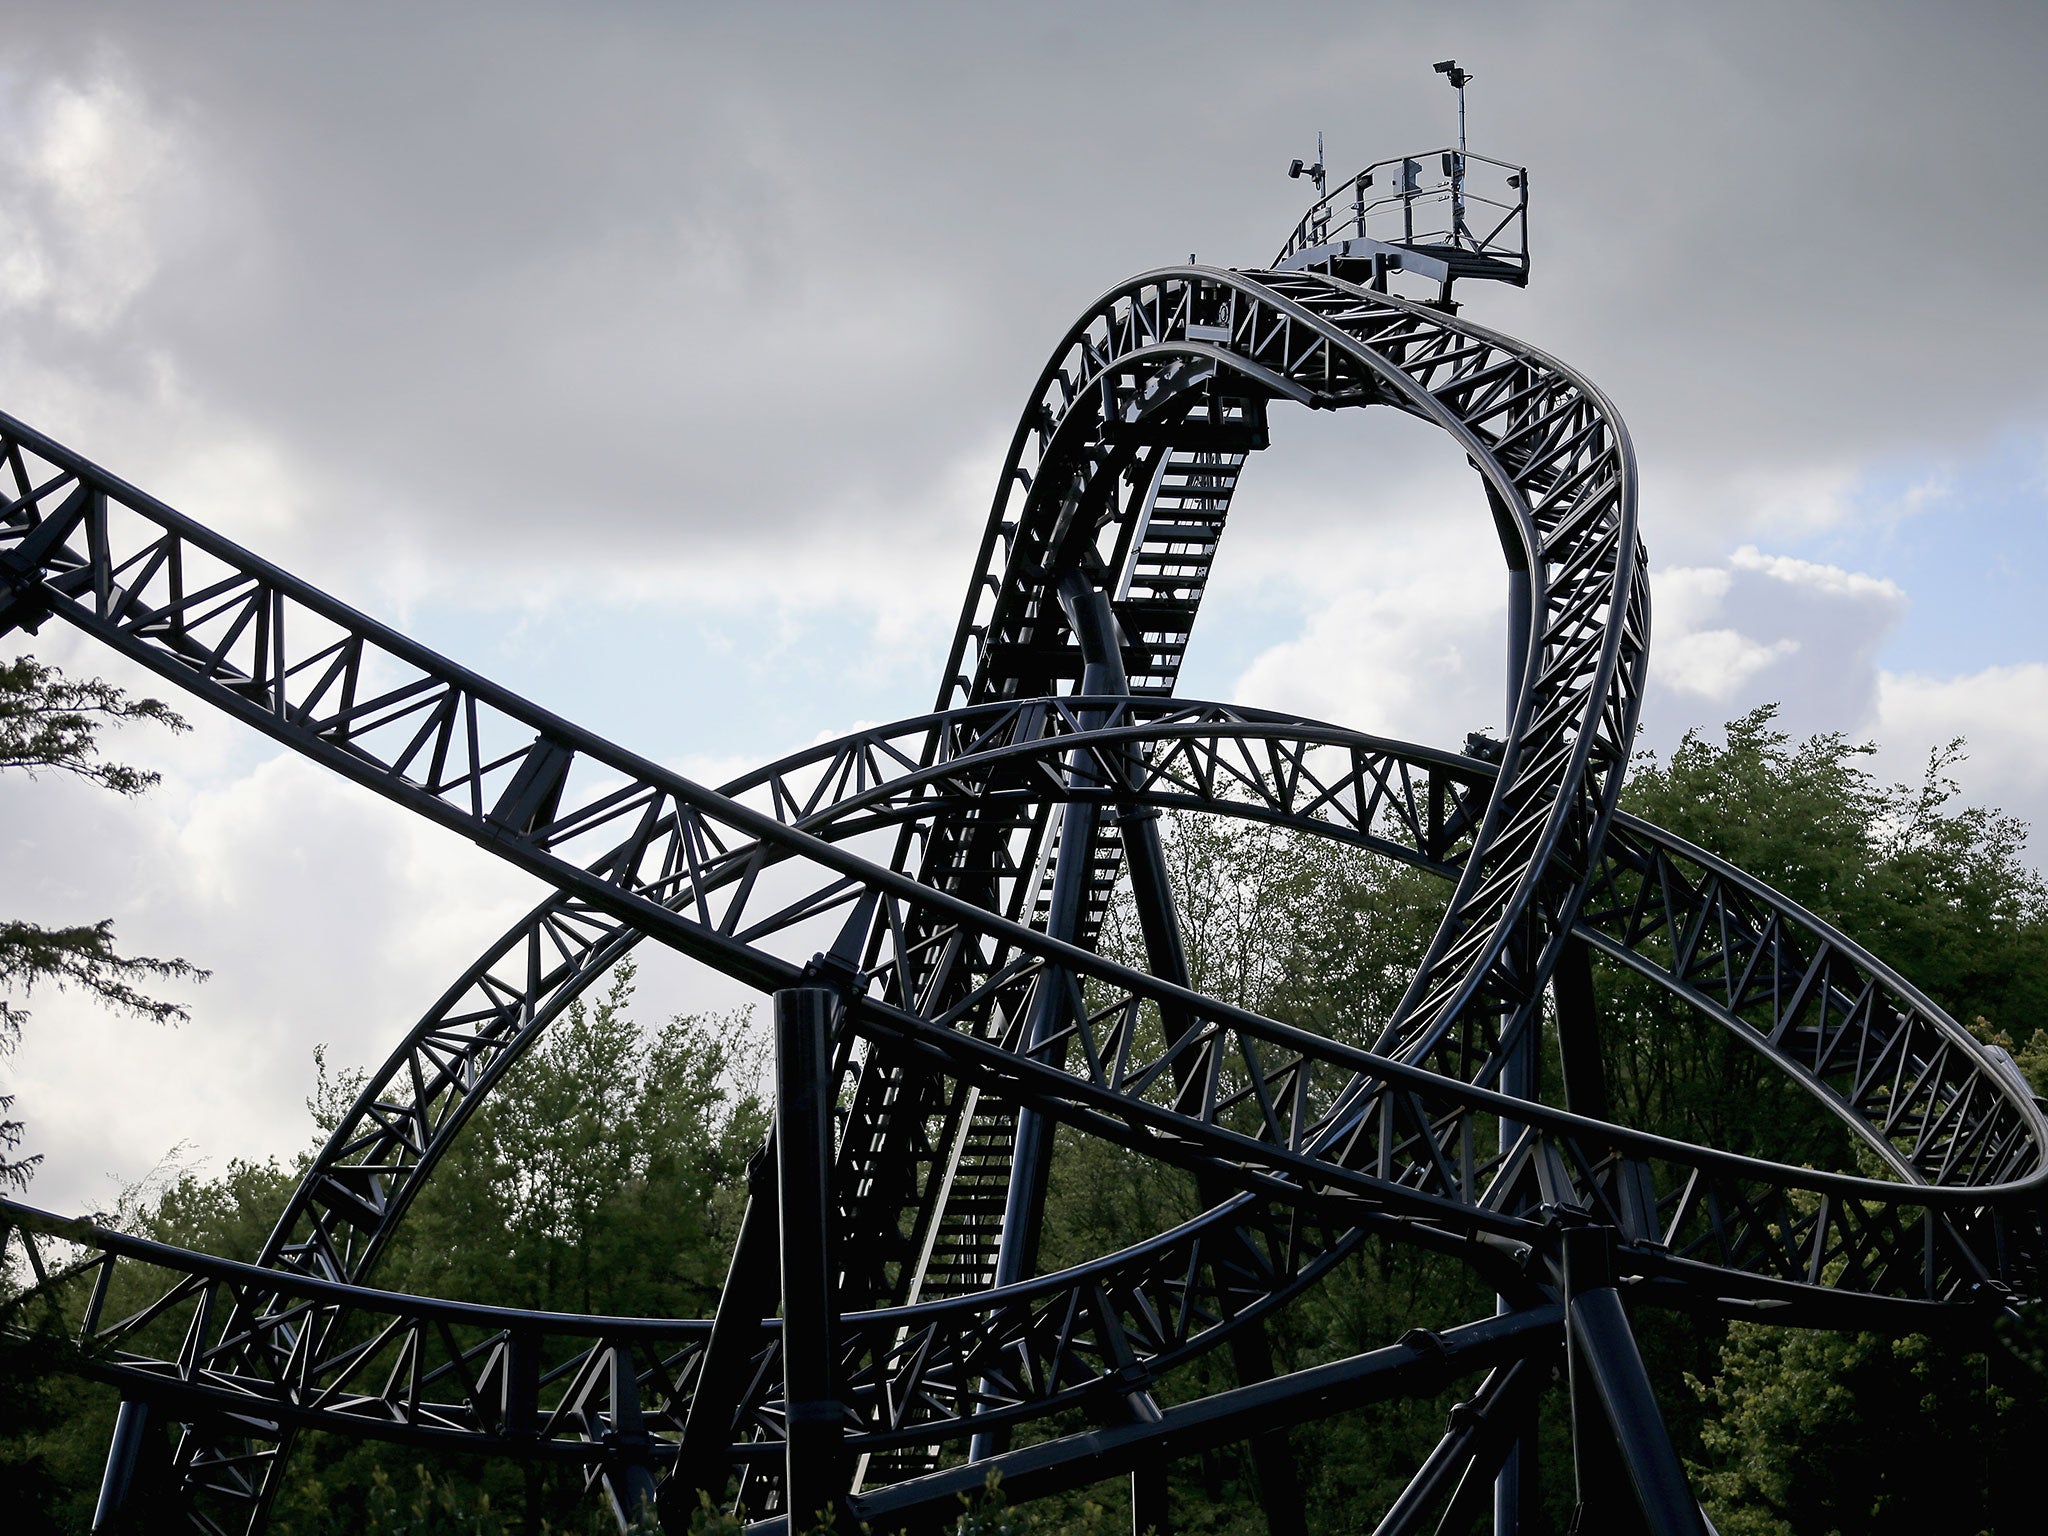 The Smiler rollercoaster at Alton Towers Resort where two carriages crashed on 2 June